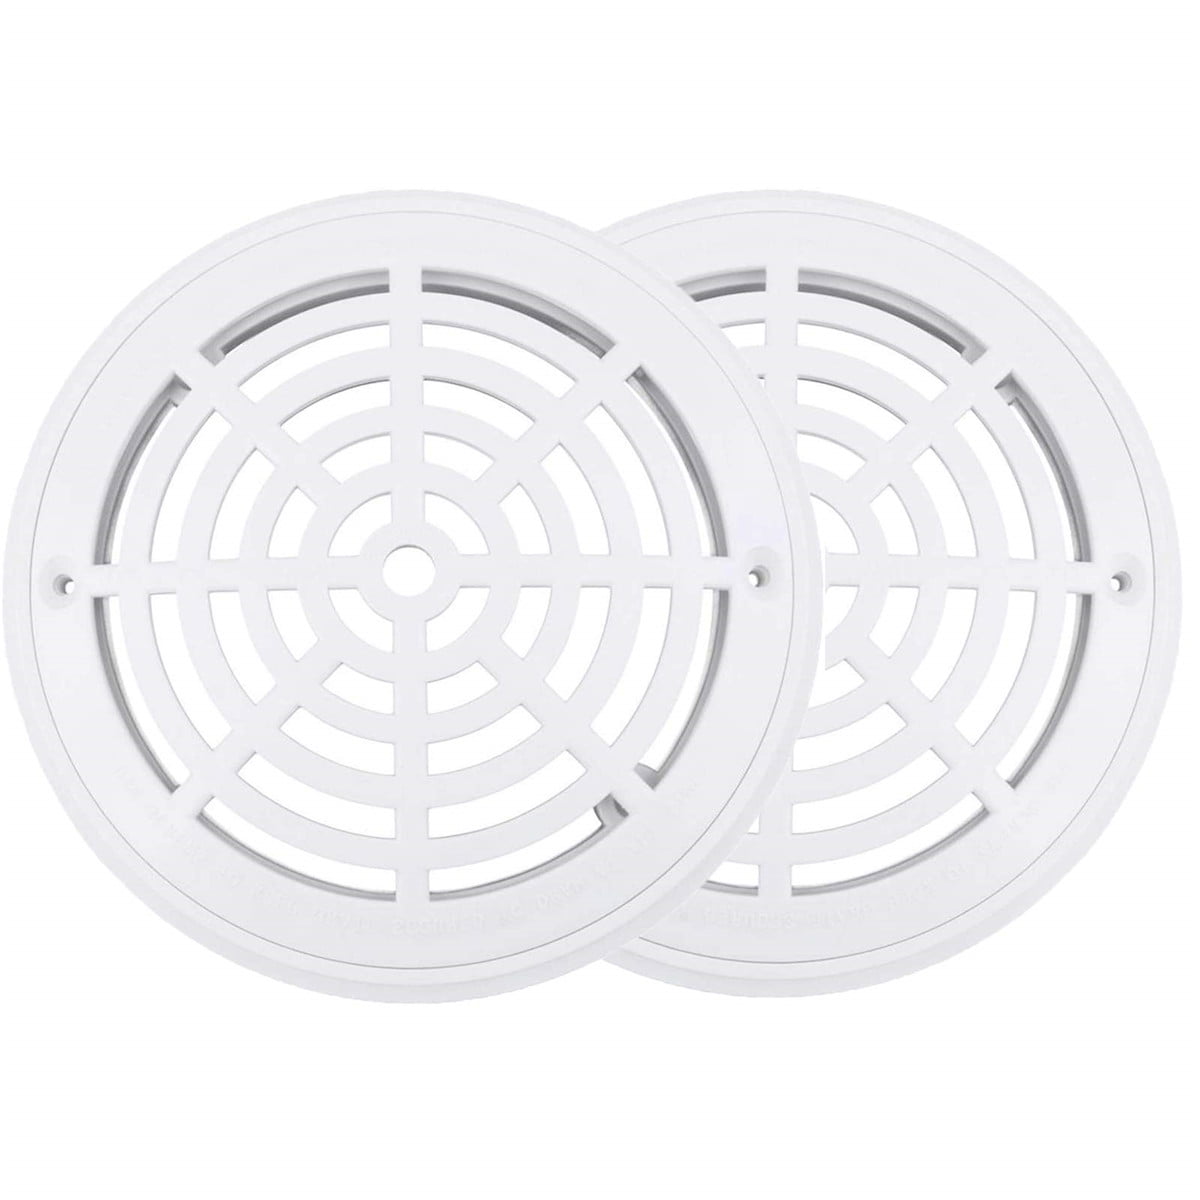 8 Inch White Pool Main Drain Cover Replacement Universal Pool Drain Cover with Screws Fit for Swimming Pools Accessary 